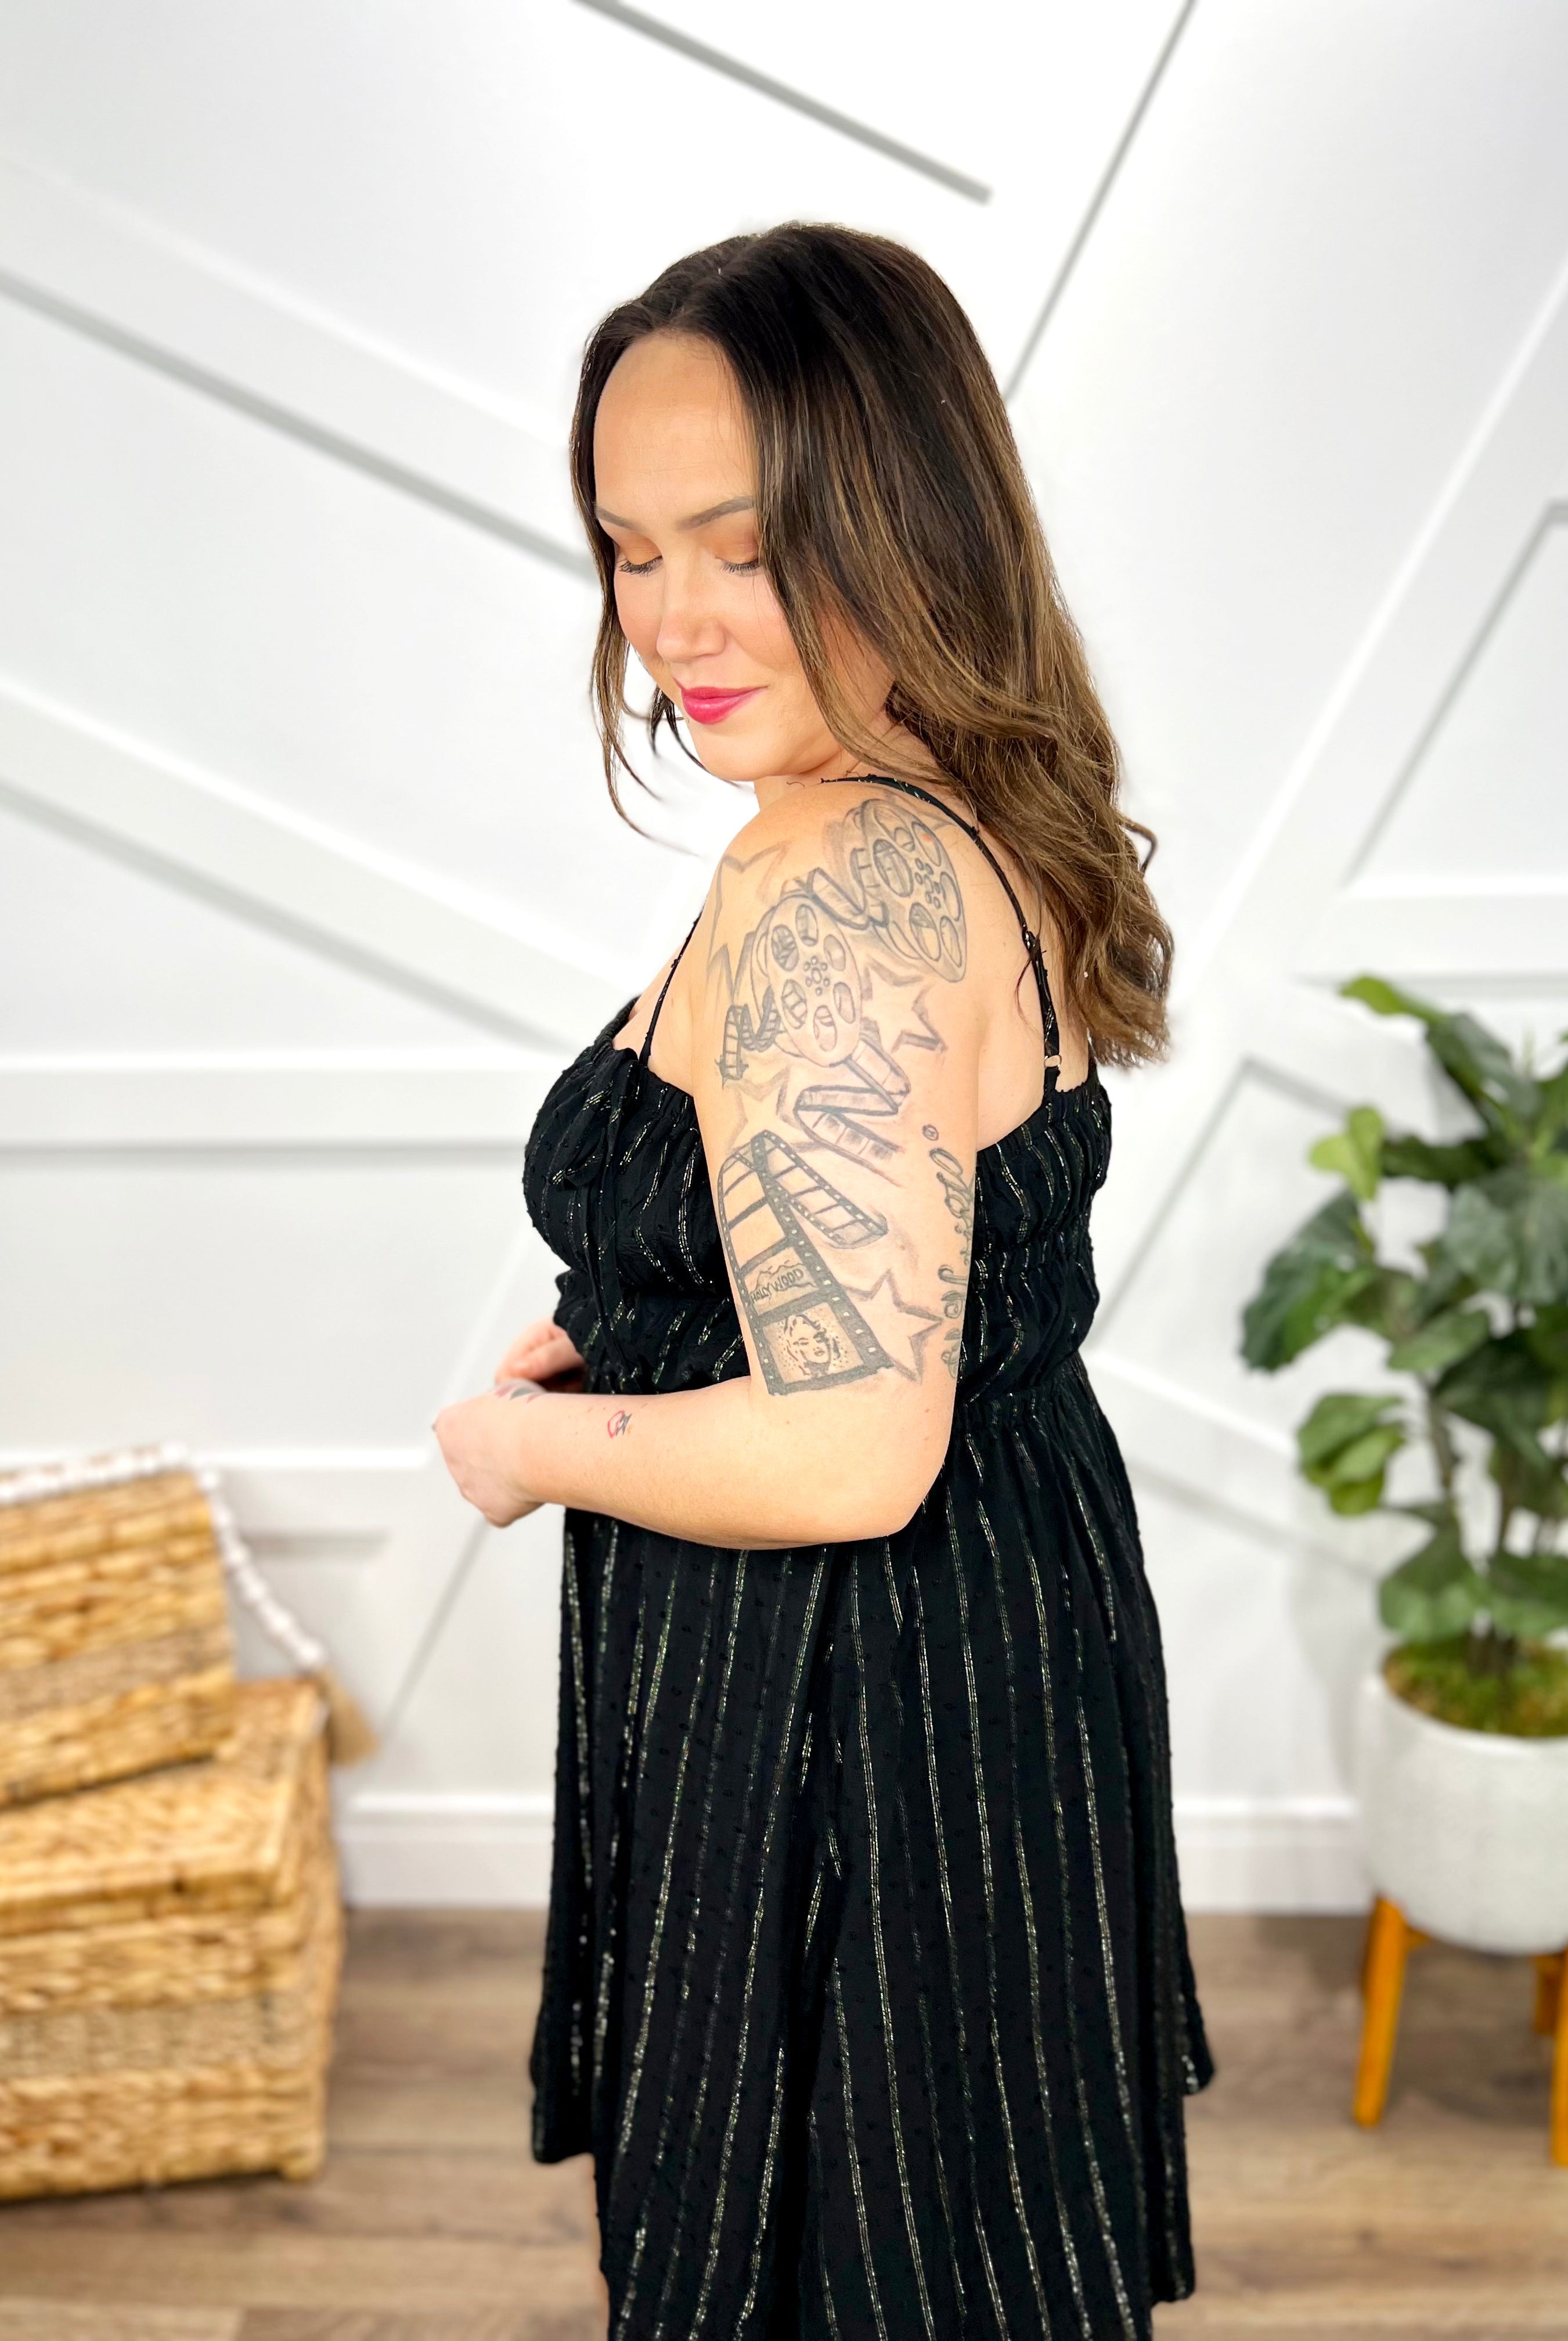 RESTOCK : The Engagement Dress-230 Dresses/Jumpsuits/Rompers-White Birch-Heathered Boho Boutique, Women's Fashion and Accessories in Palmetto, FL